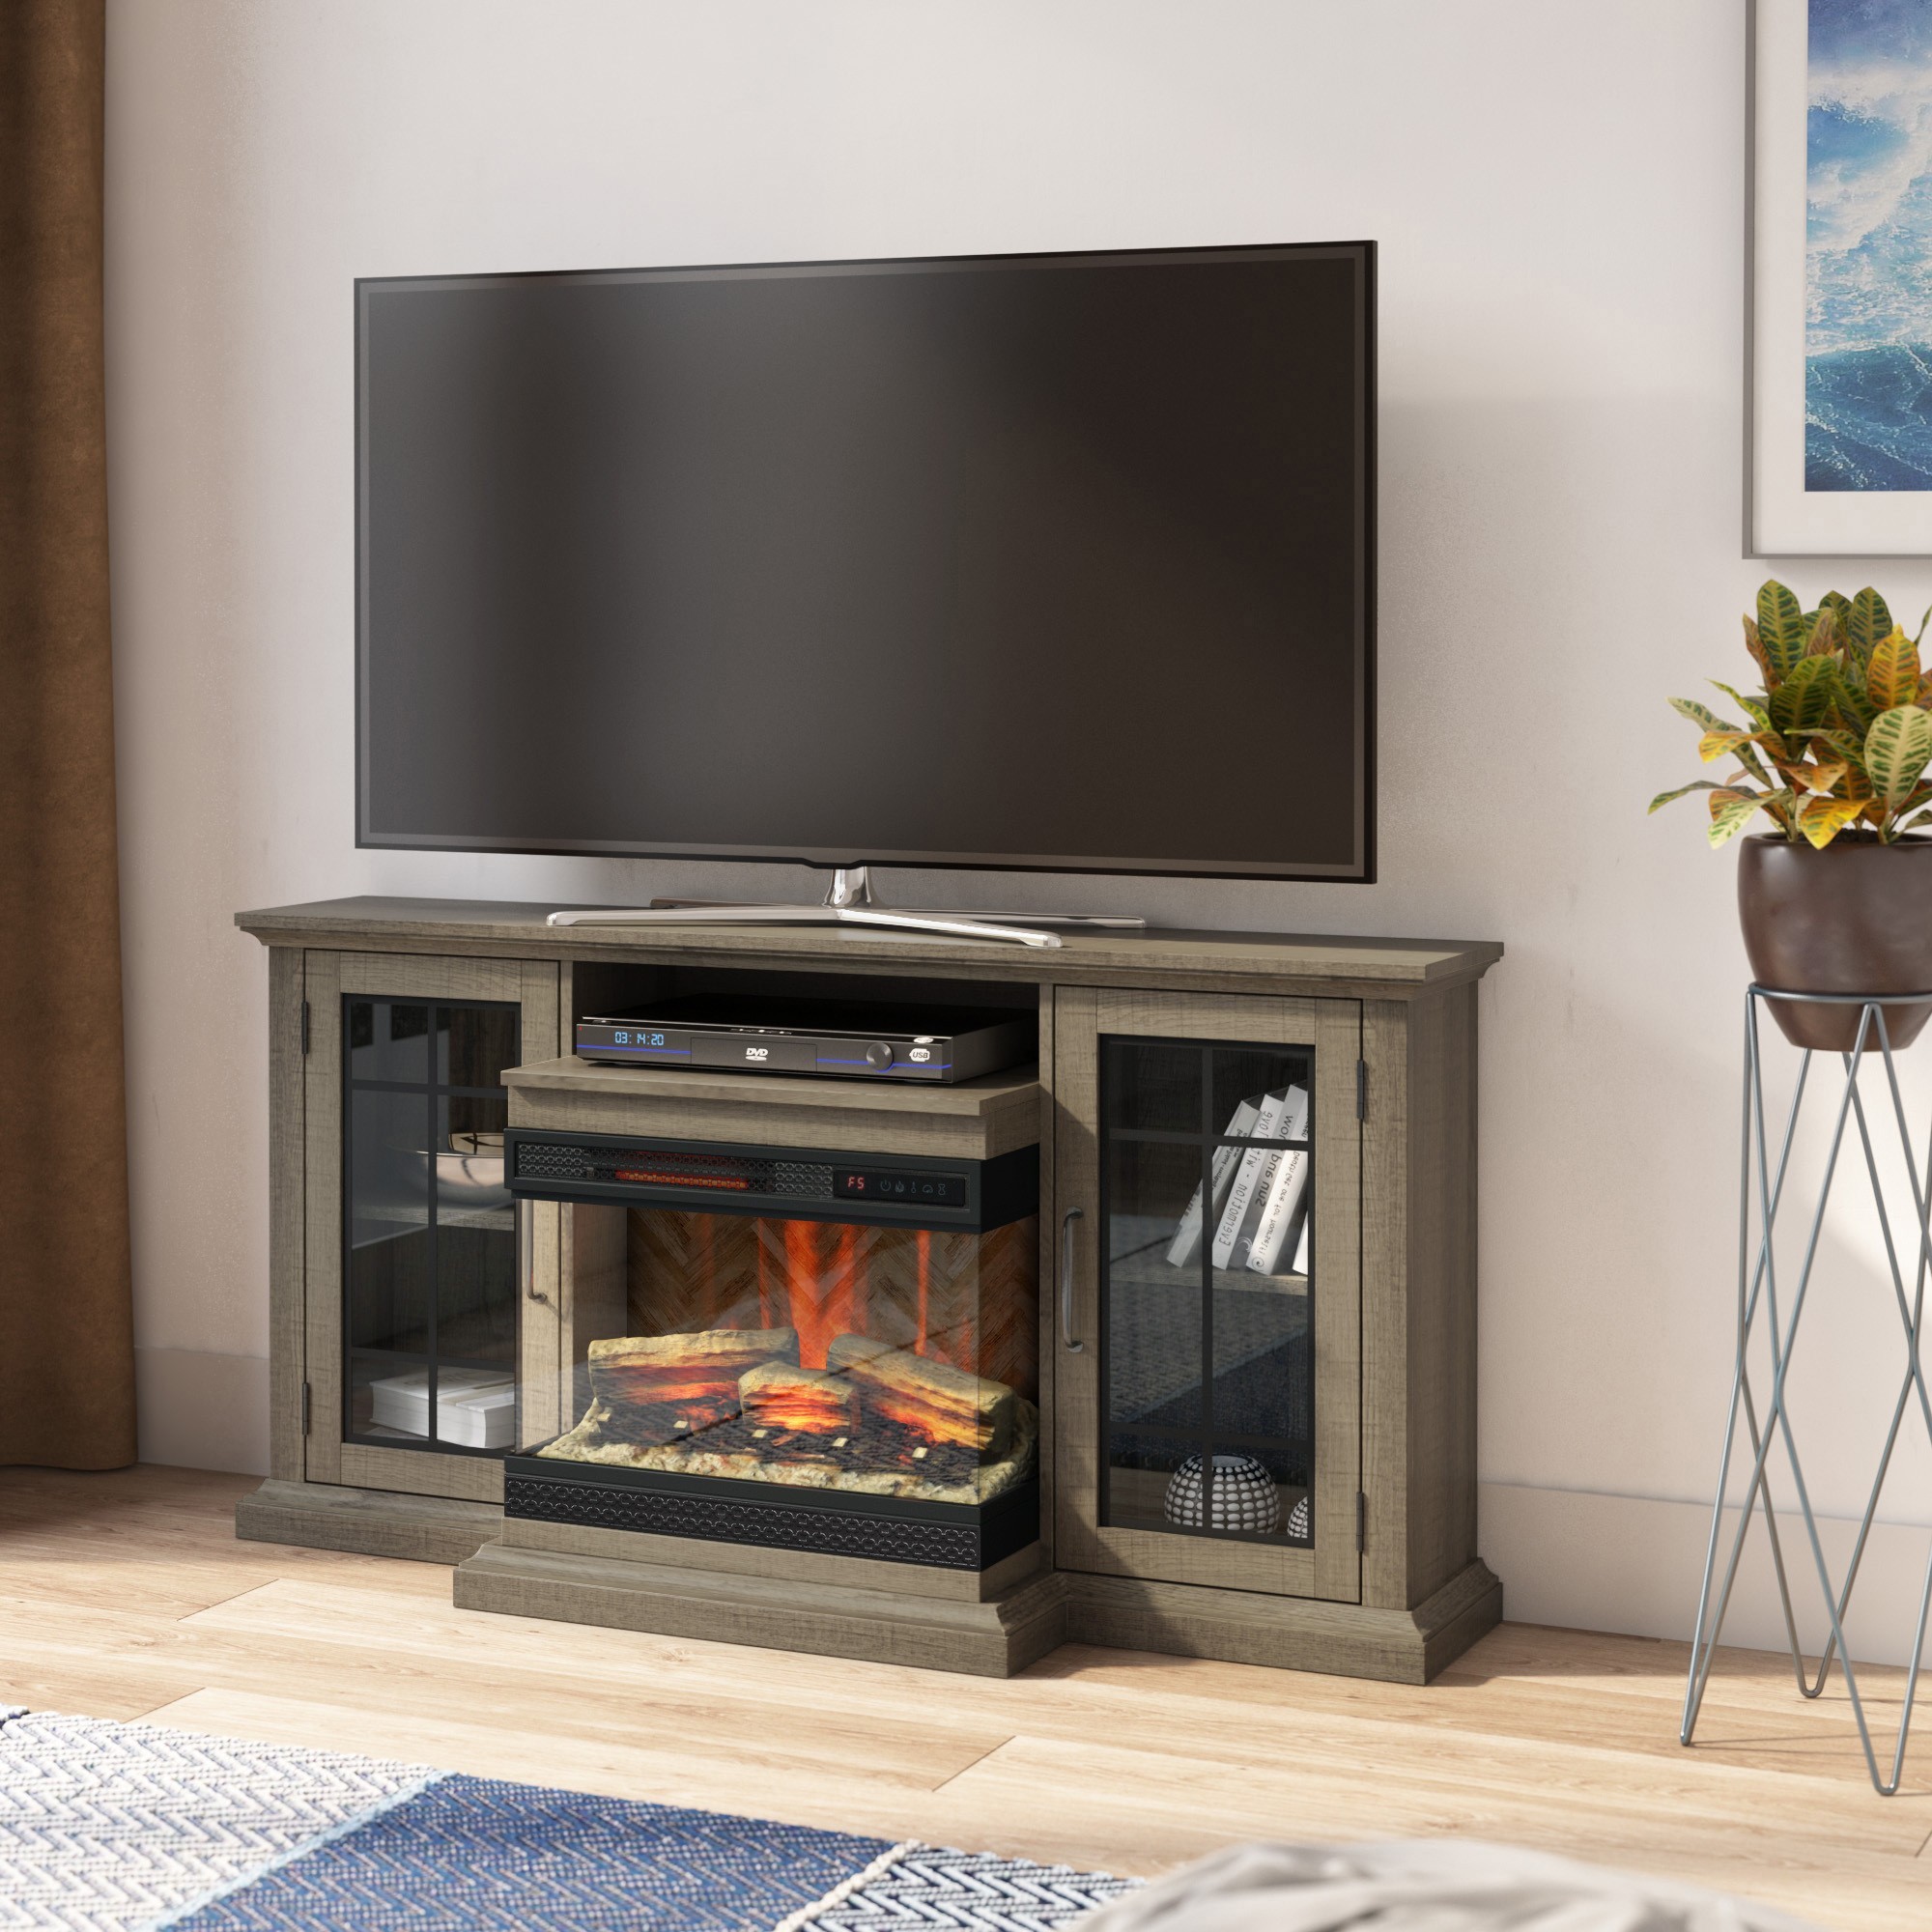 How To Choose A TV Stand Fireplace - Foter